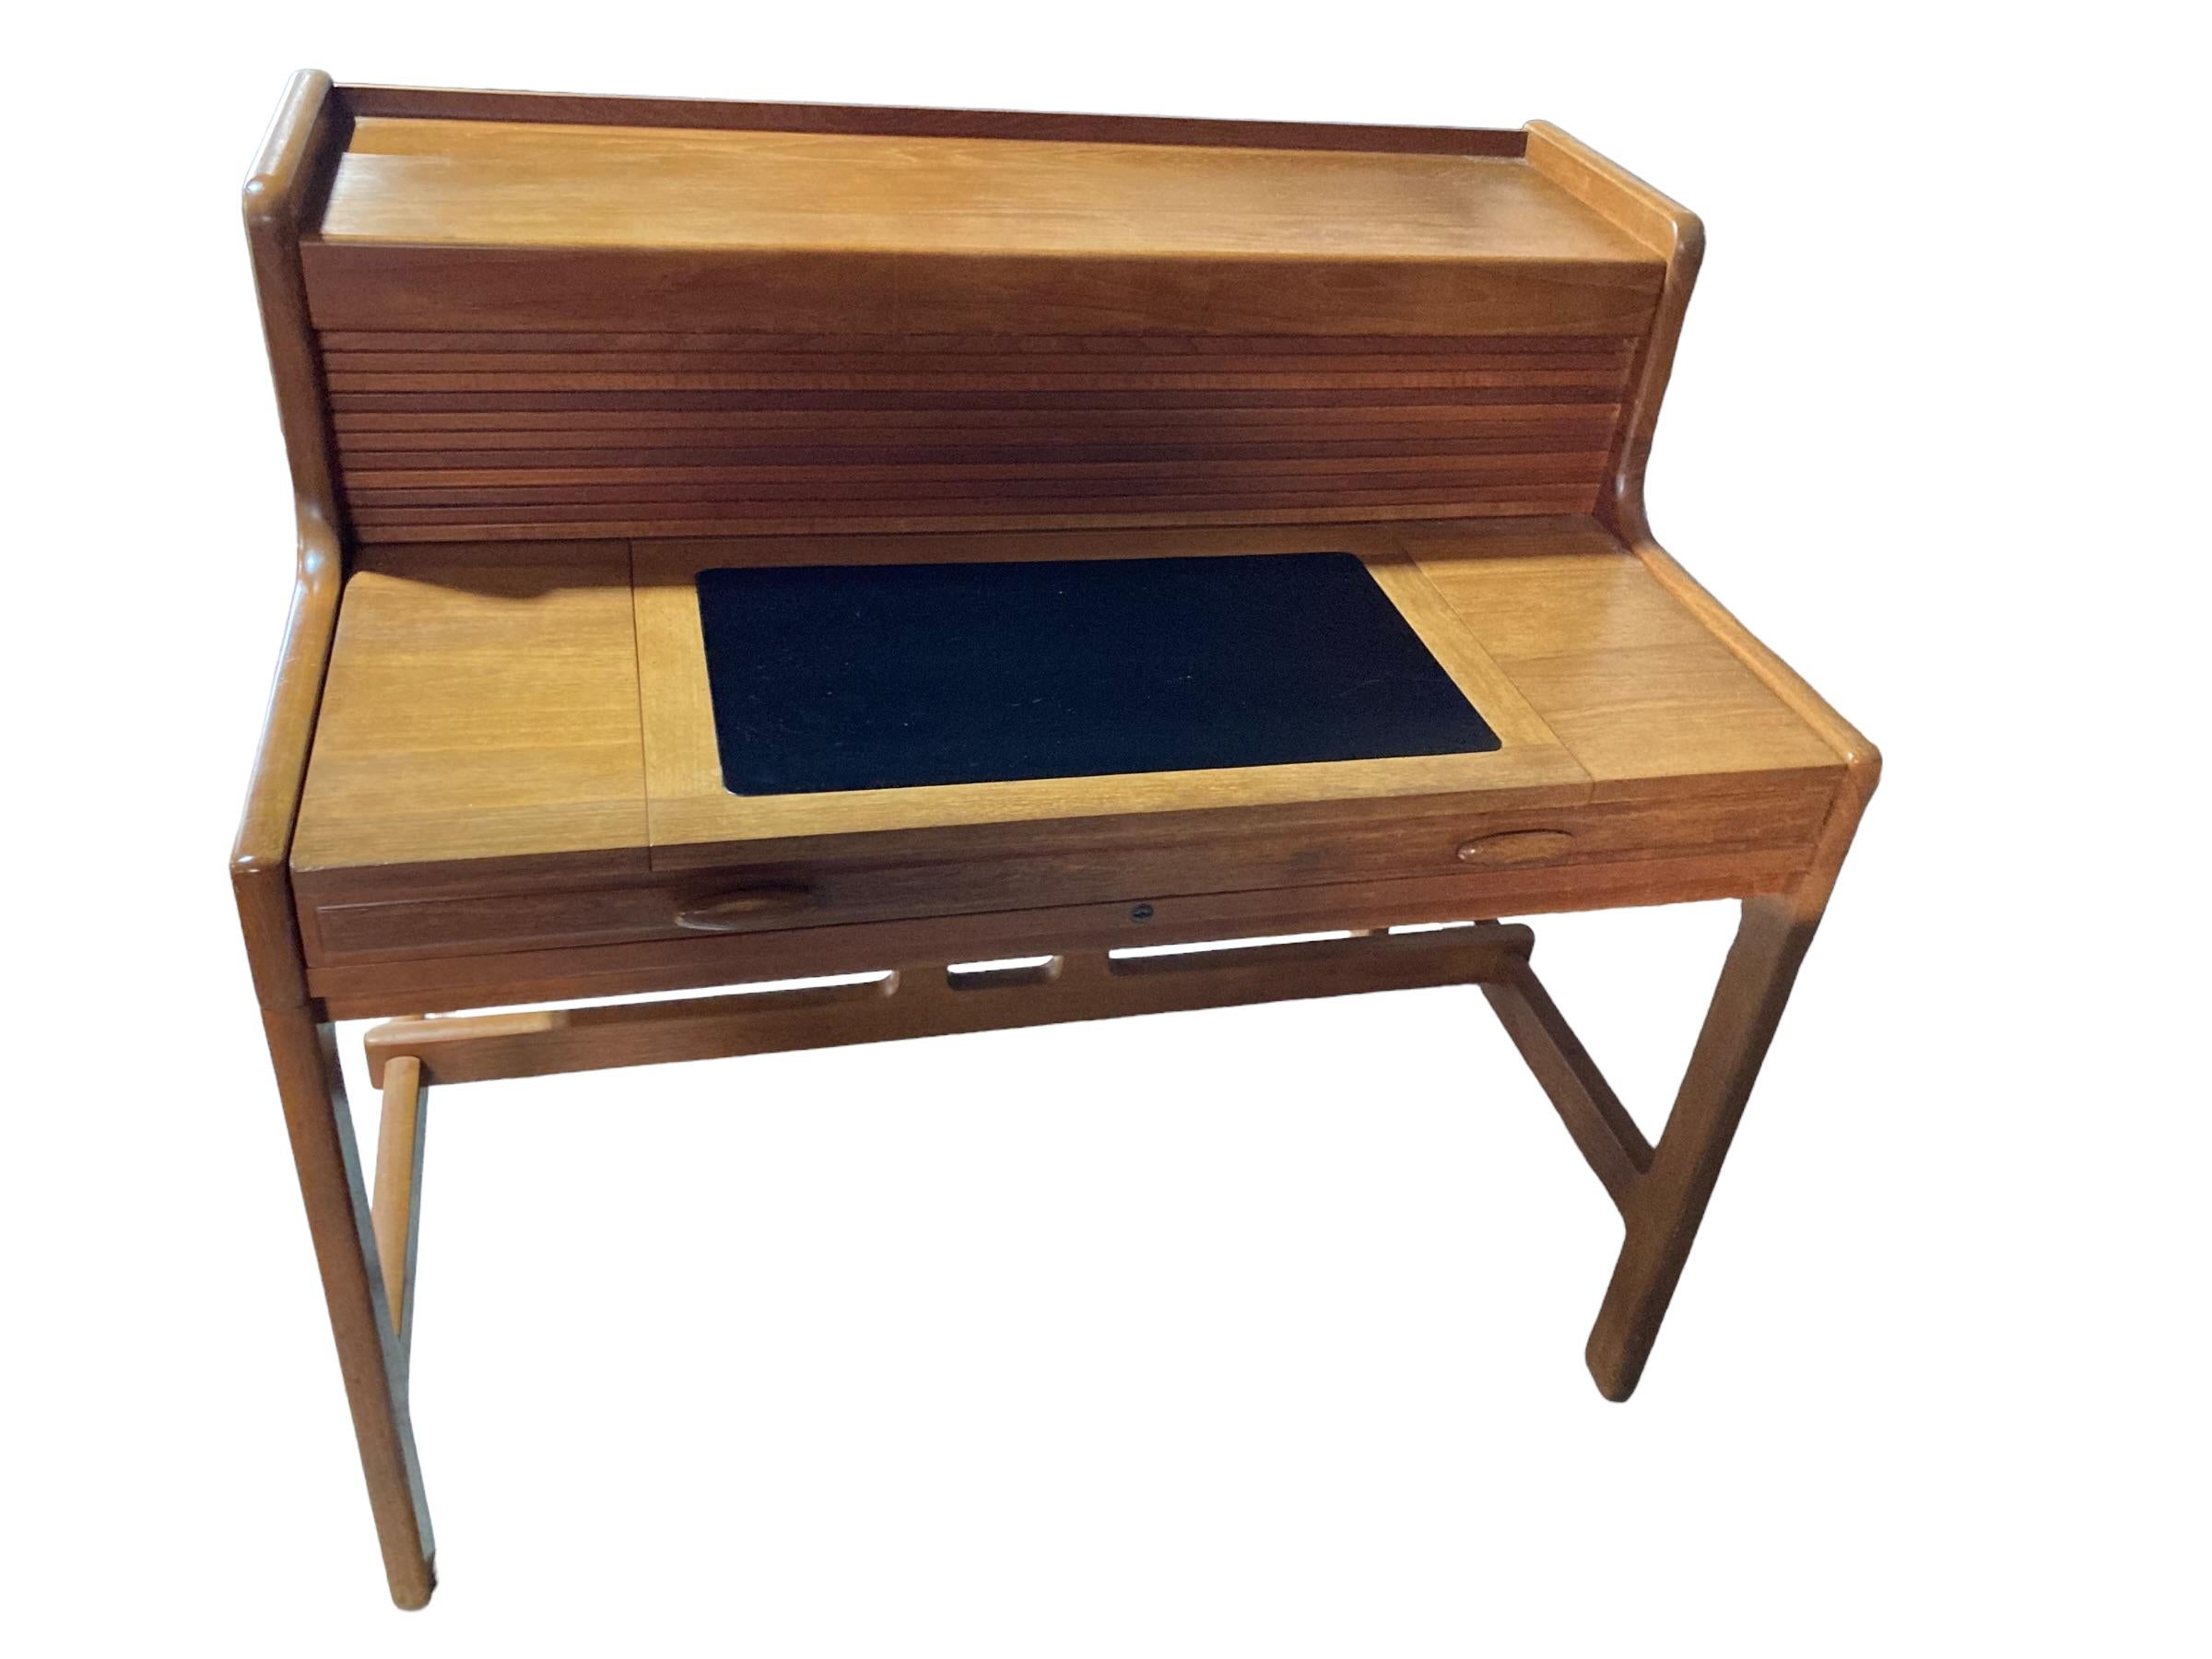 This stunning, Mid-Century Modern desk was designed by John Mortensen and manufactured for Dyrlund. The desk surface pulls forward to raise a tambour door, behind which has a lot of compartments. Small, solid teak drawers on the left side of the